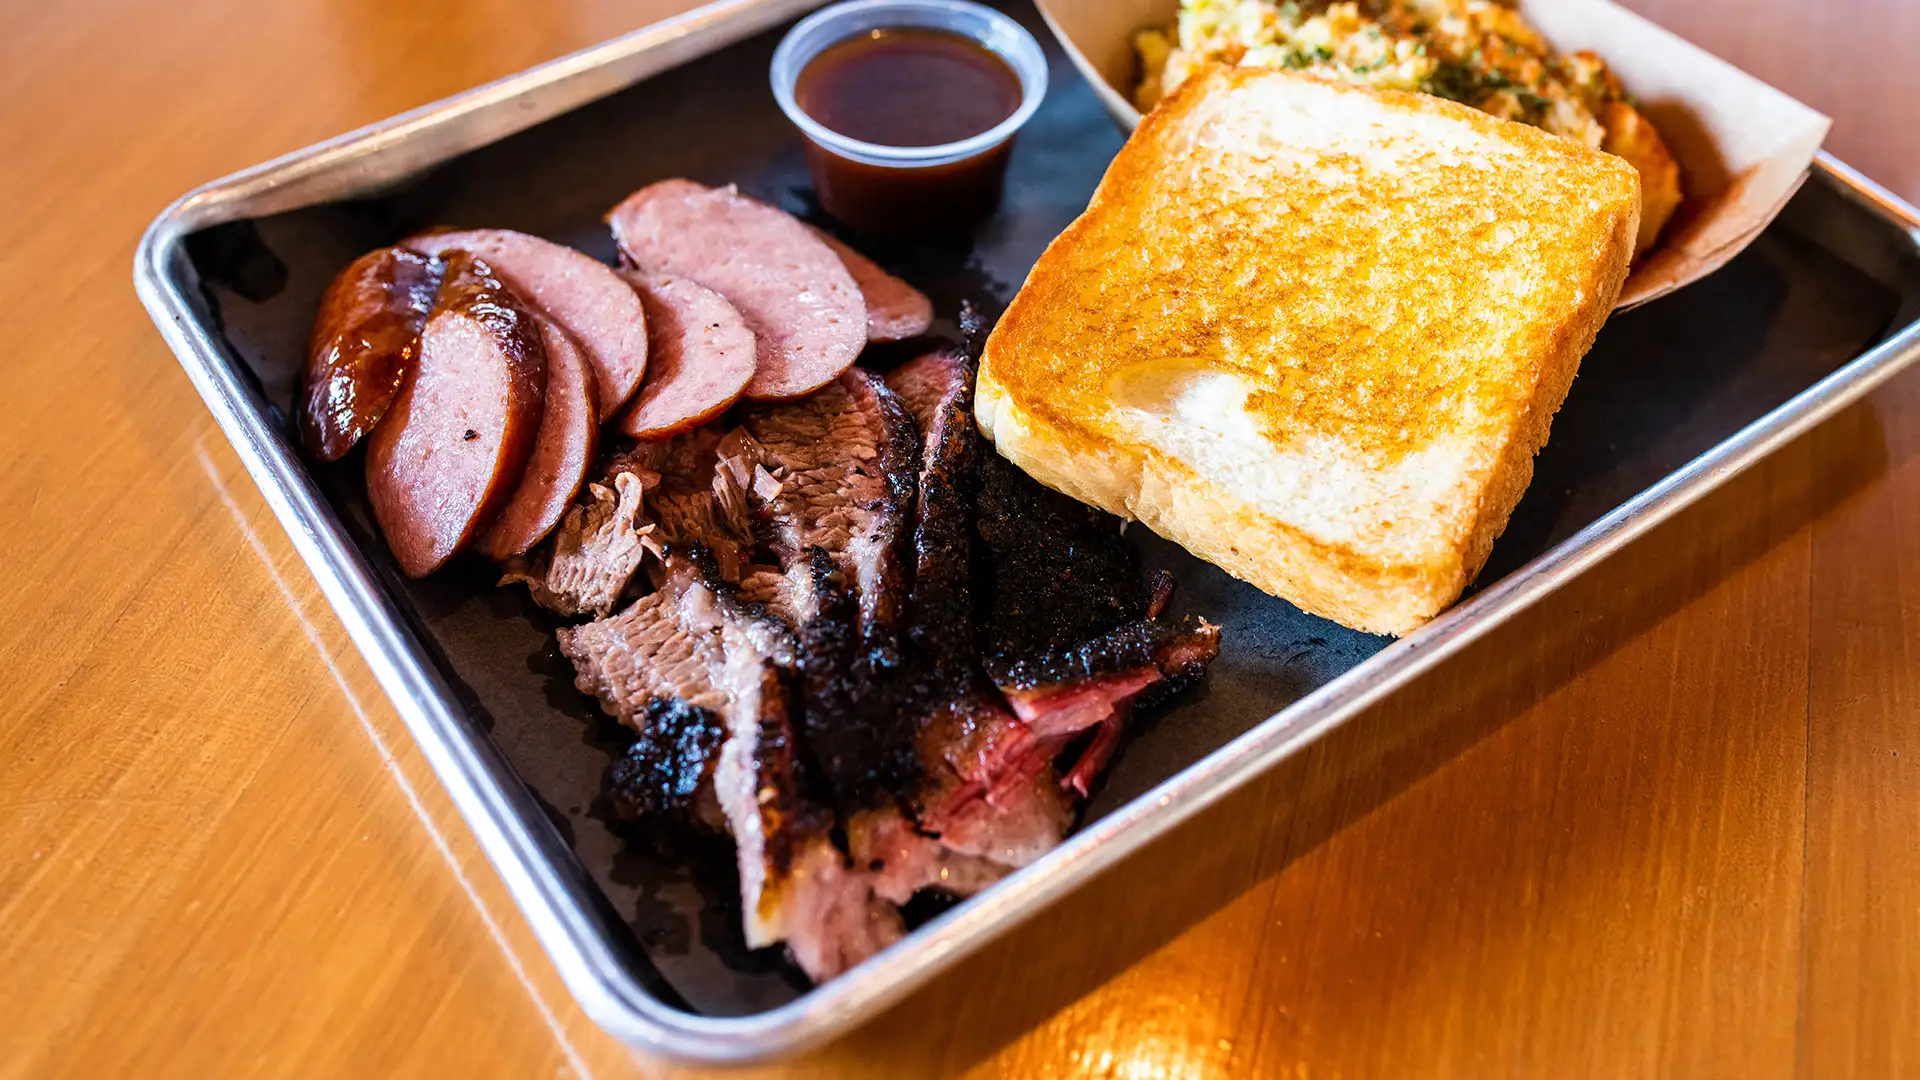 Plate with sausage, sliced brisket with a side of potato salad and toast